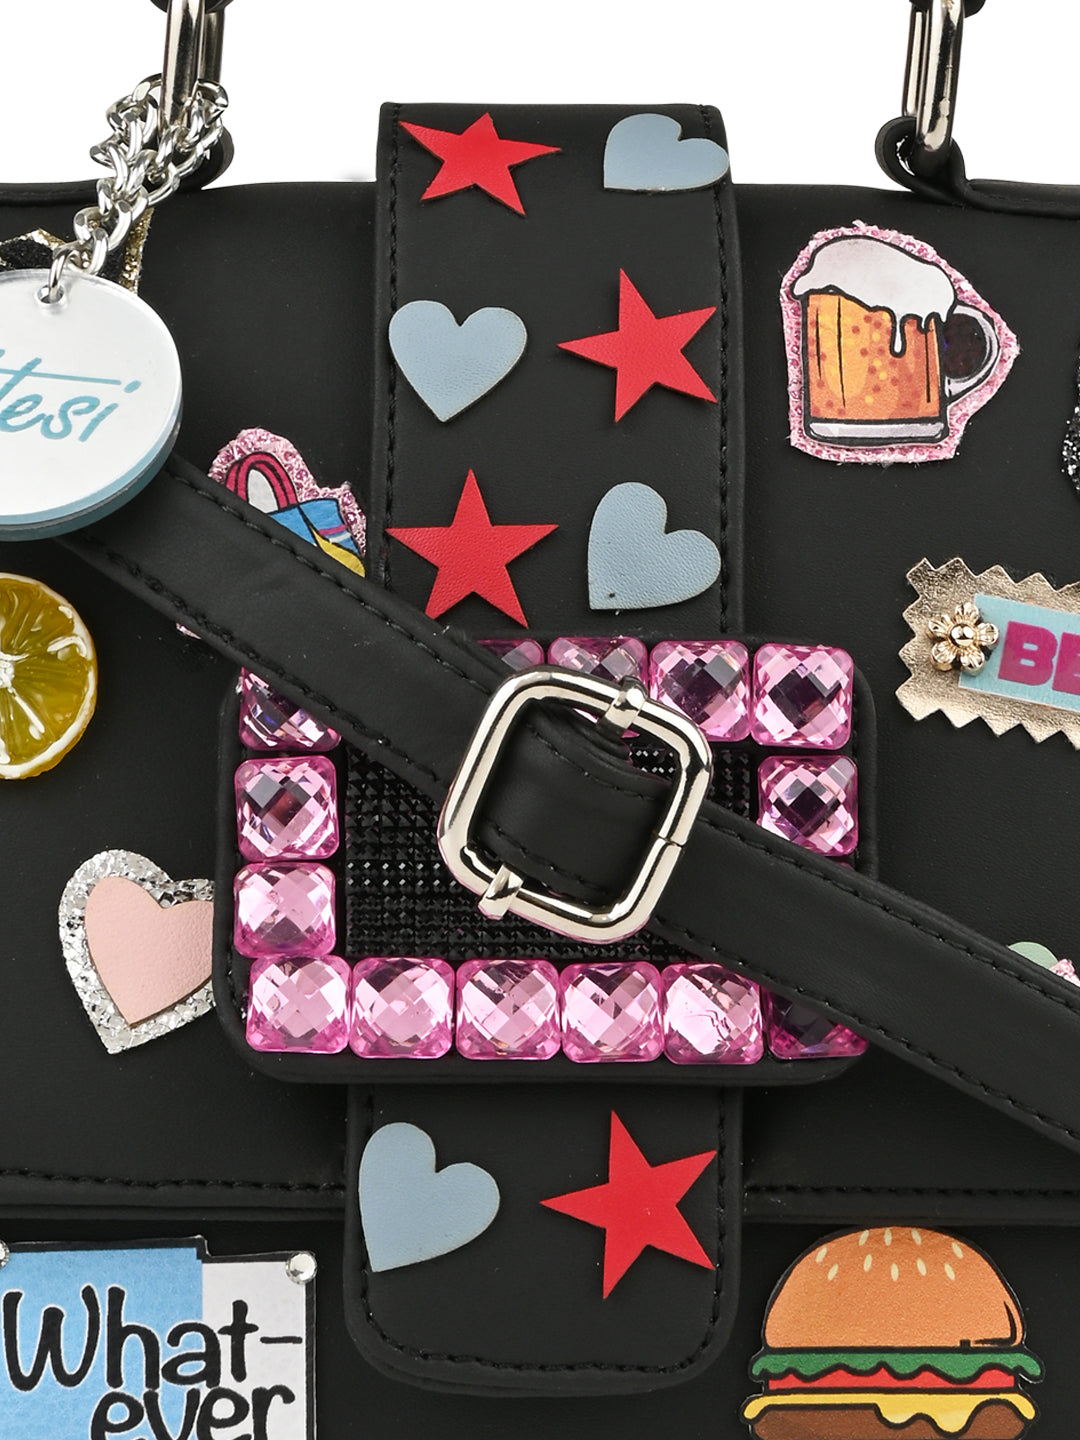 A Black pop badges belt sling bag with a lot of stickers on it, made of PU material and featuring multiple compartments, by Vdesi.